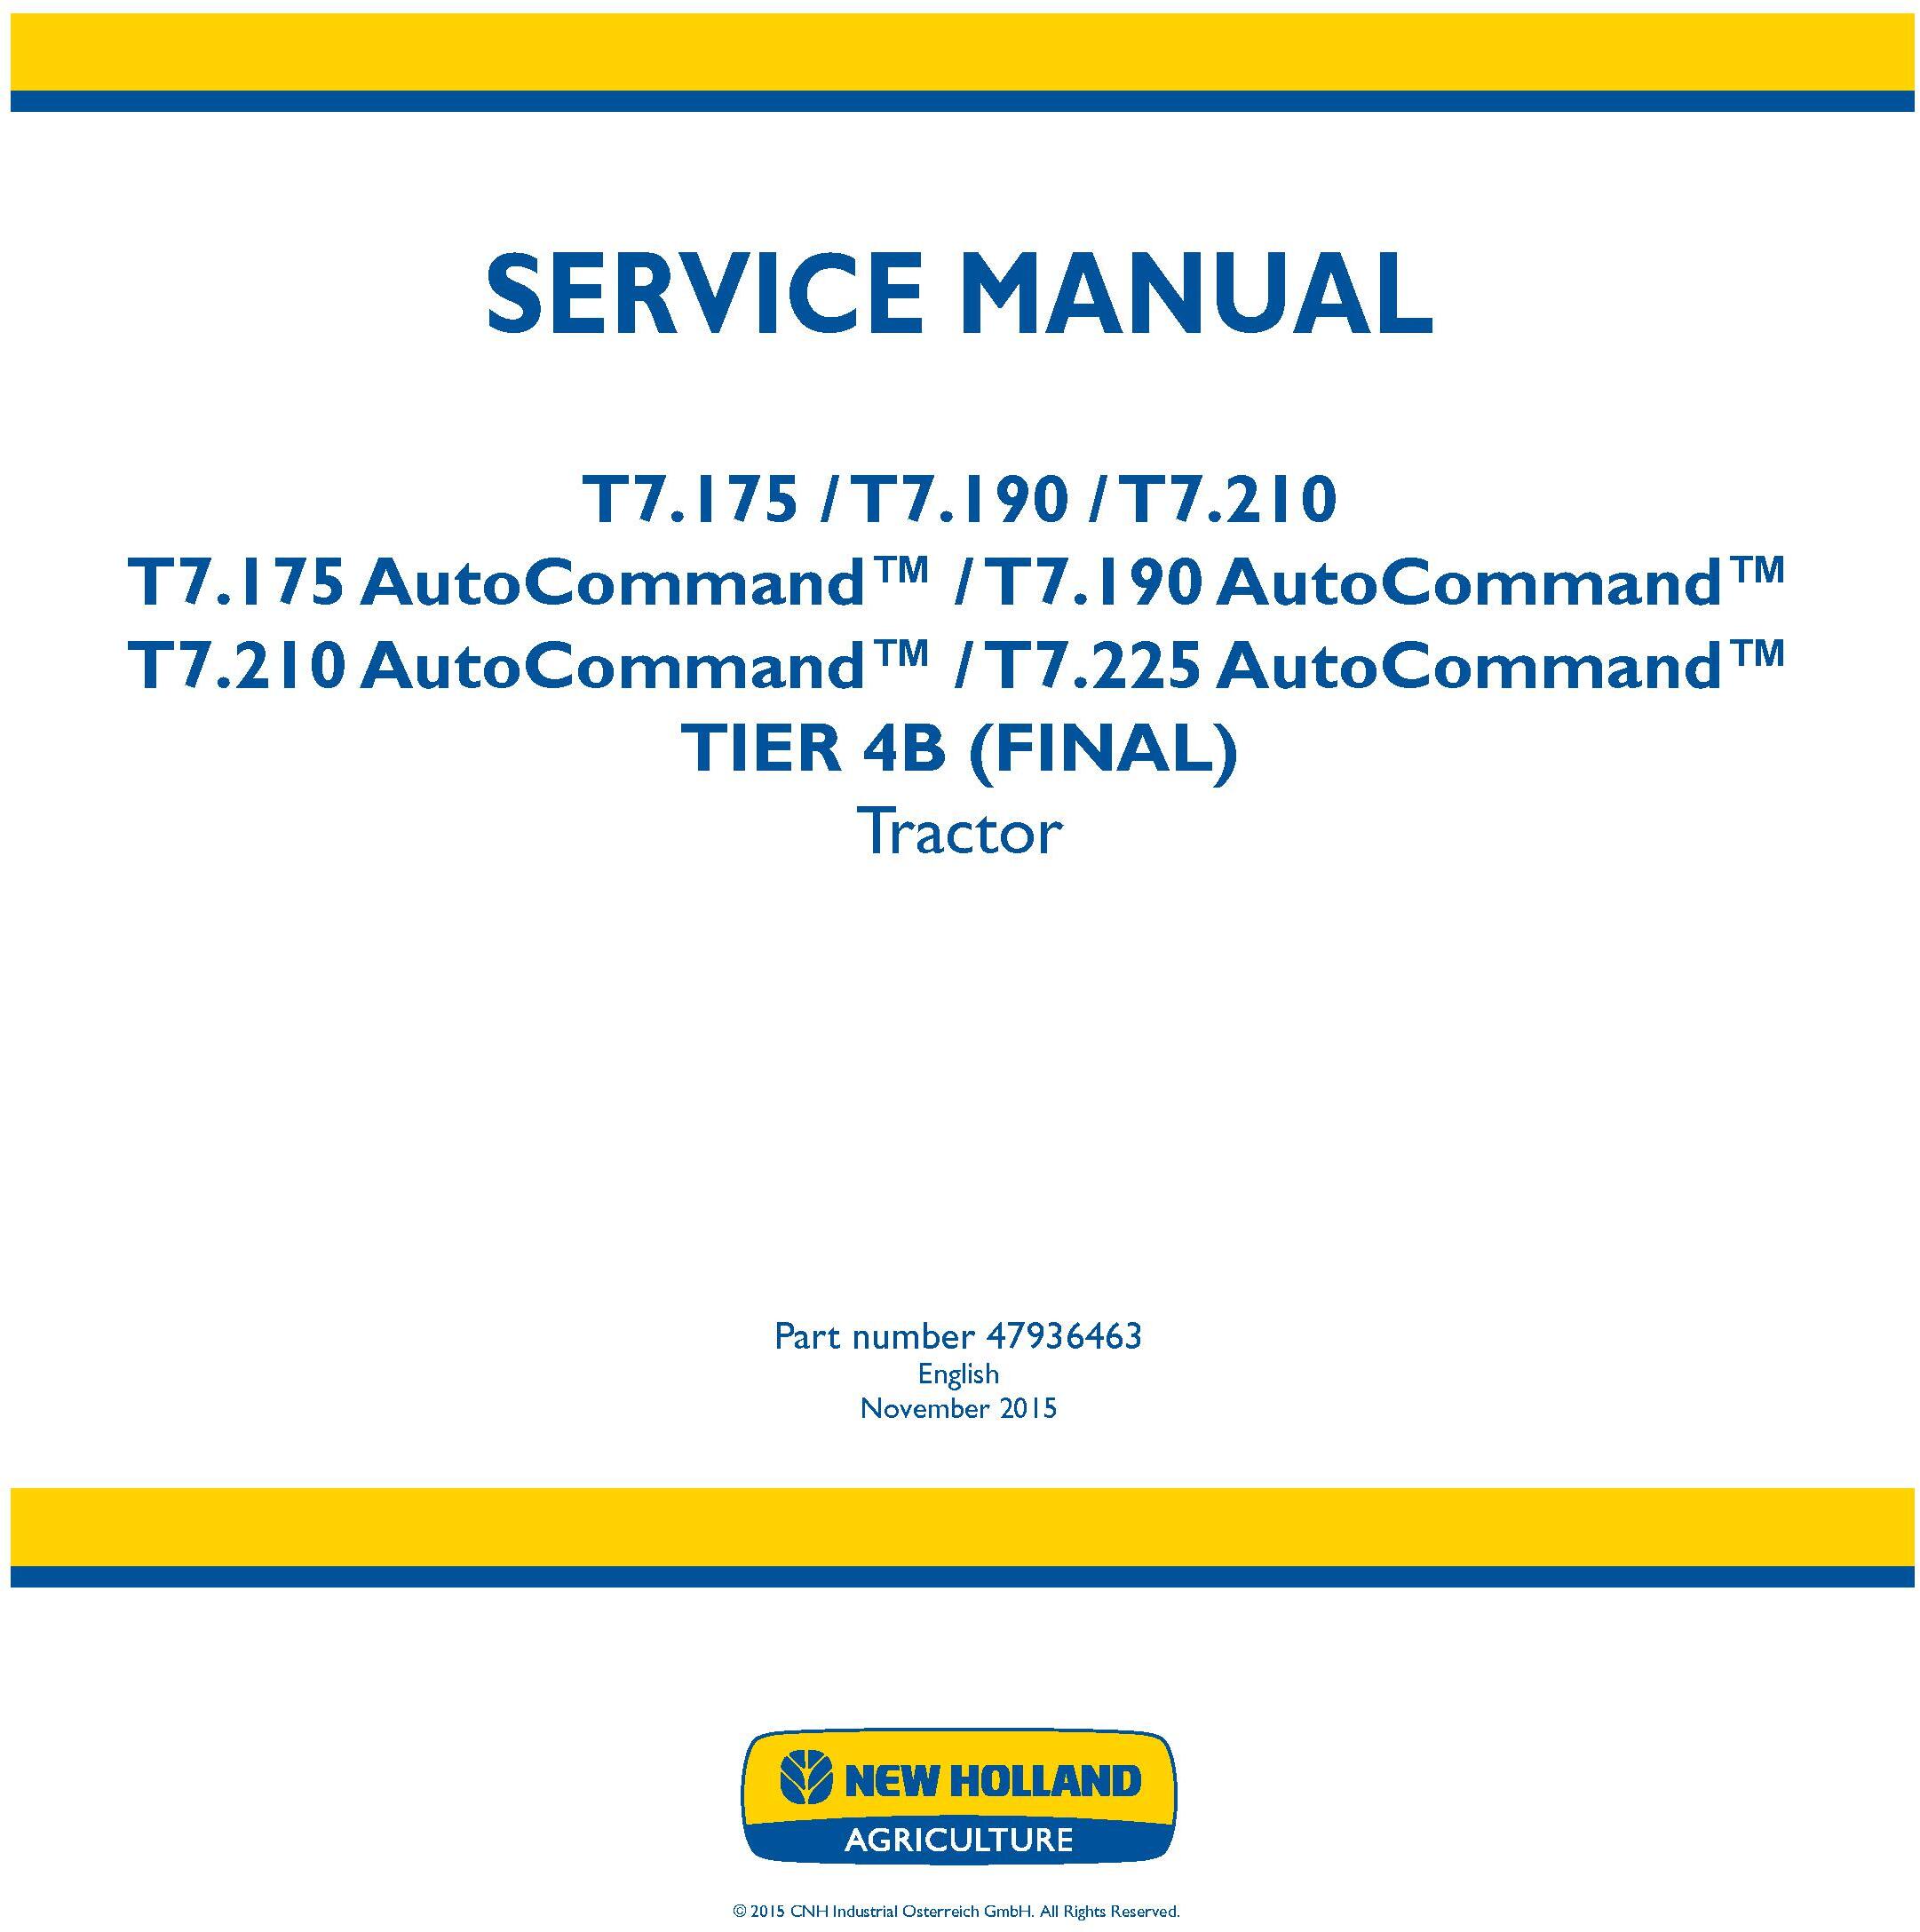 New Holland T7.175, T7.190, T7.210, T7.225 and AutoCommand Tier 4B final Tractor Service Manual